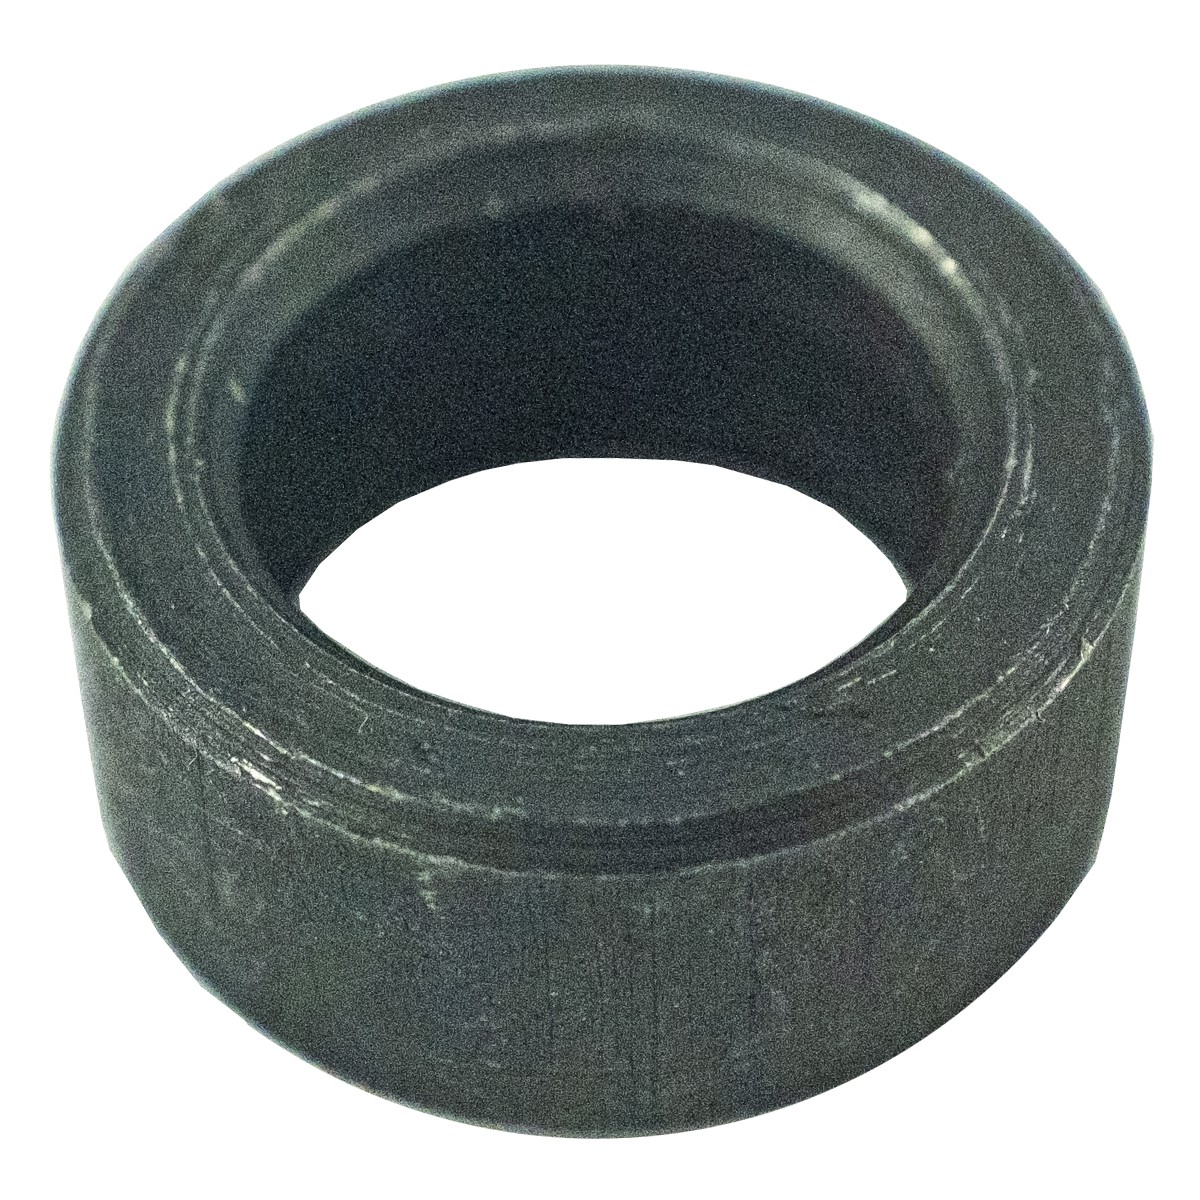 Sleeve, spacer sleeve 22 x 14 x 10 mm, support for the coupler VST MT180 / MT224 / MT270, 18090100140